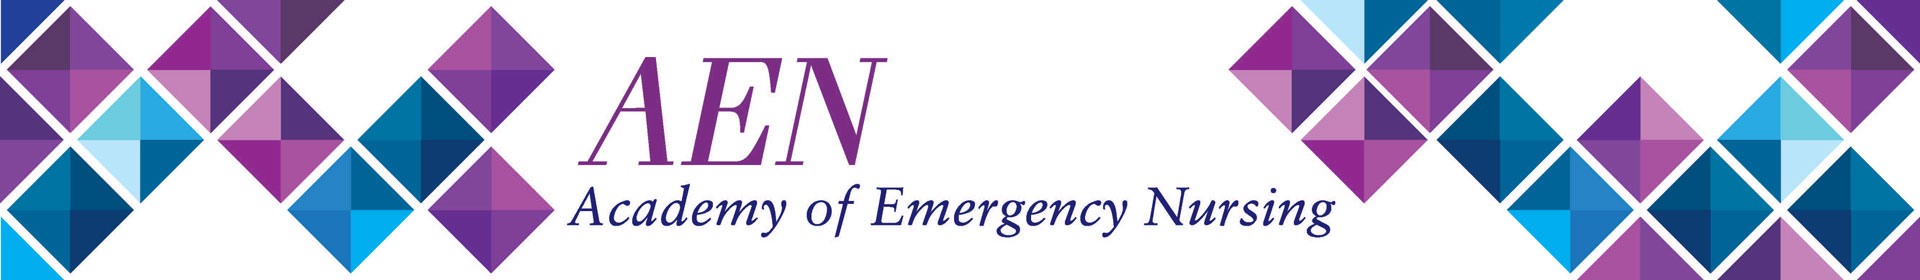 2019 Academy of Emergency Nursing Board Applications Event Banner